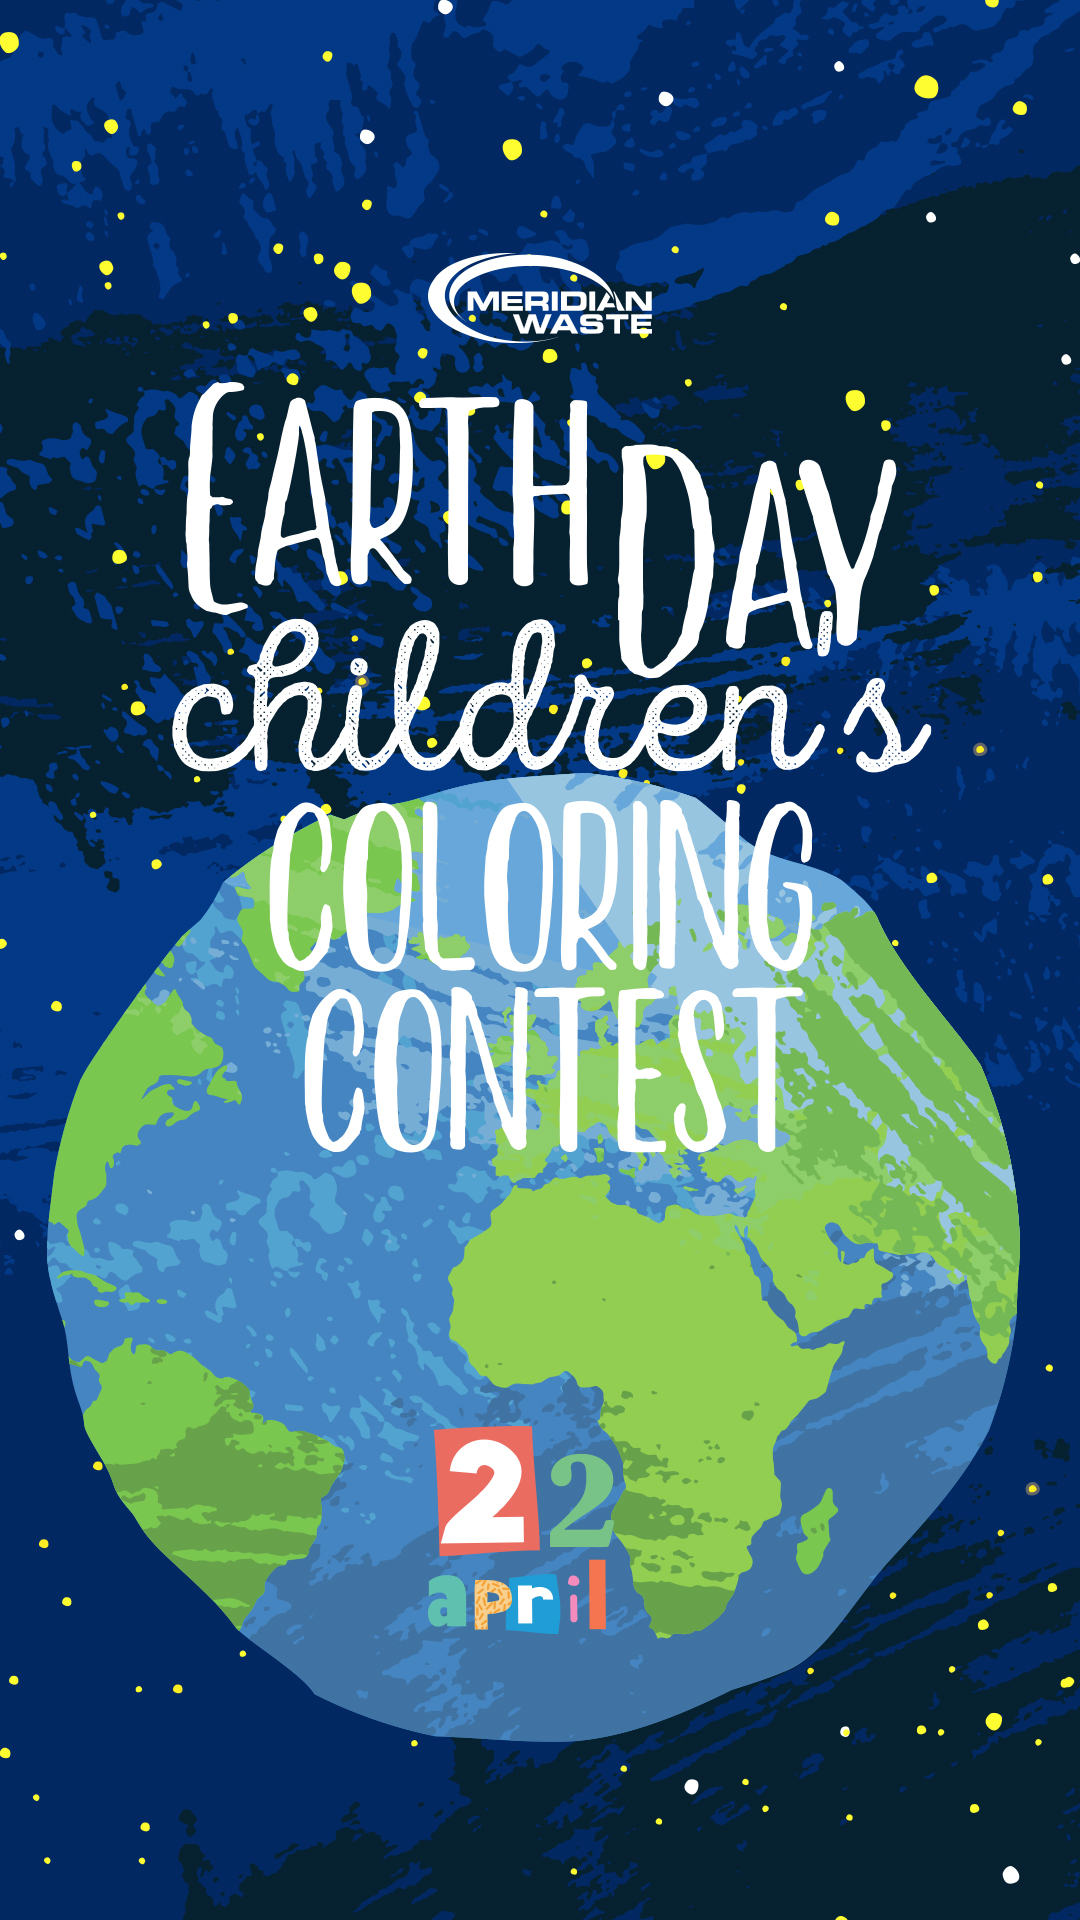 Third Annual Earth Day Coloring Contest for Children is OPEN!